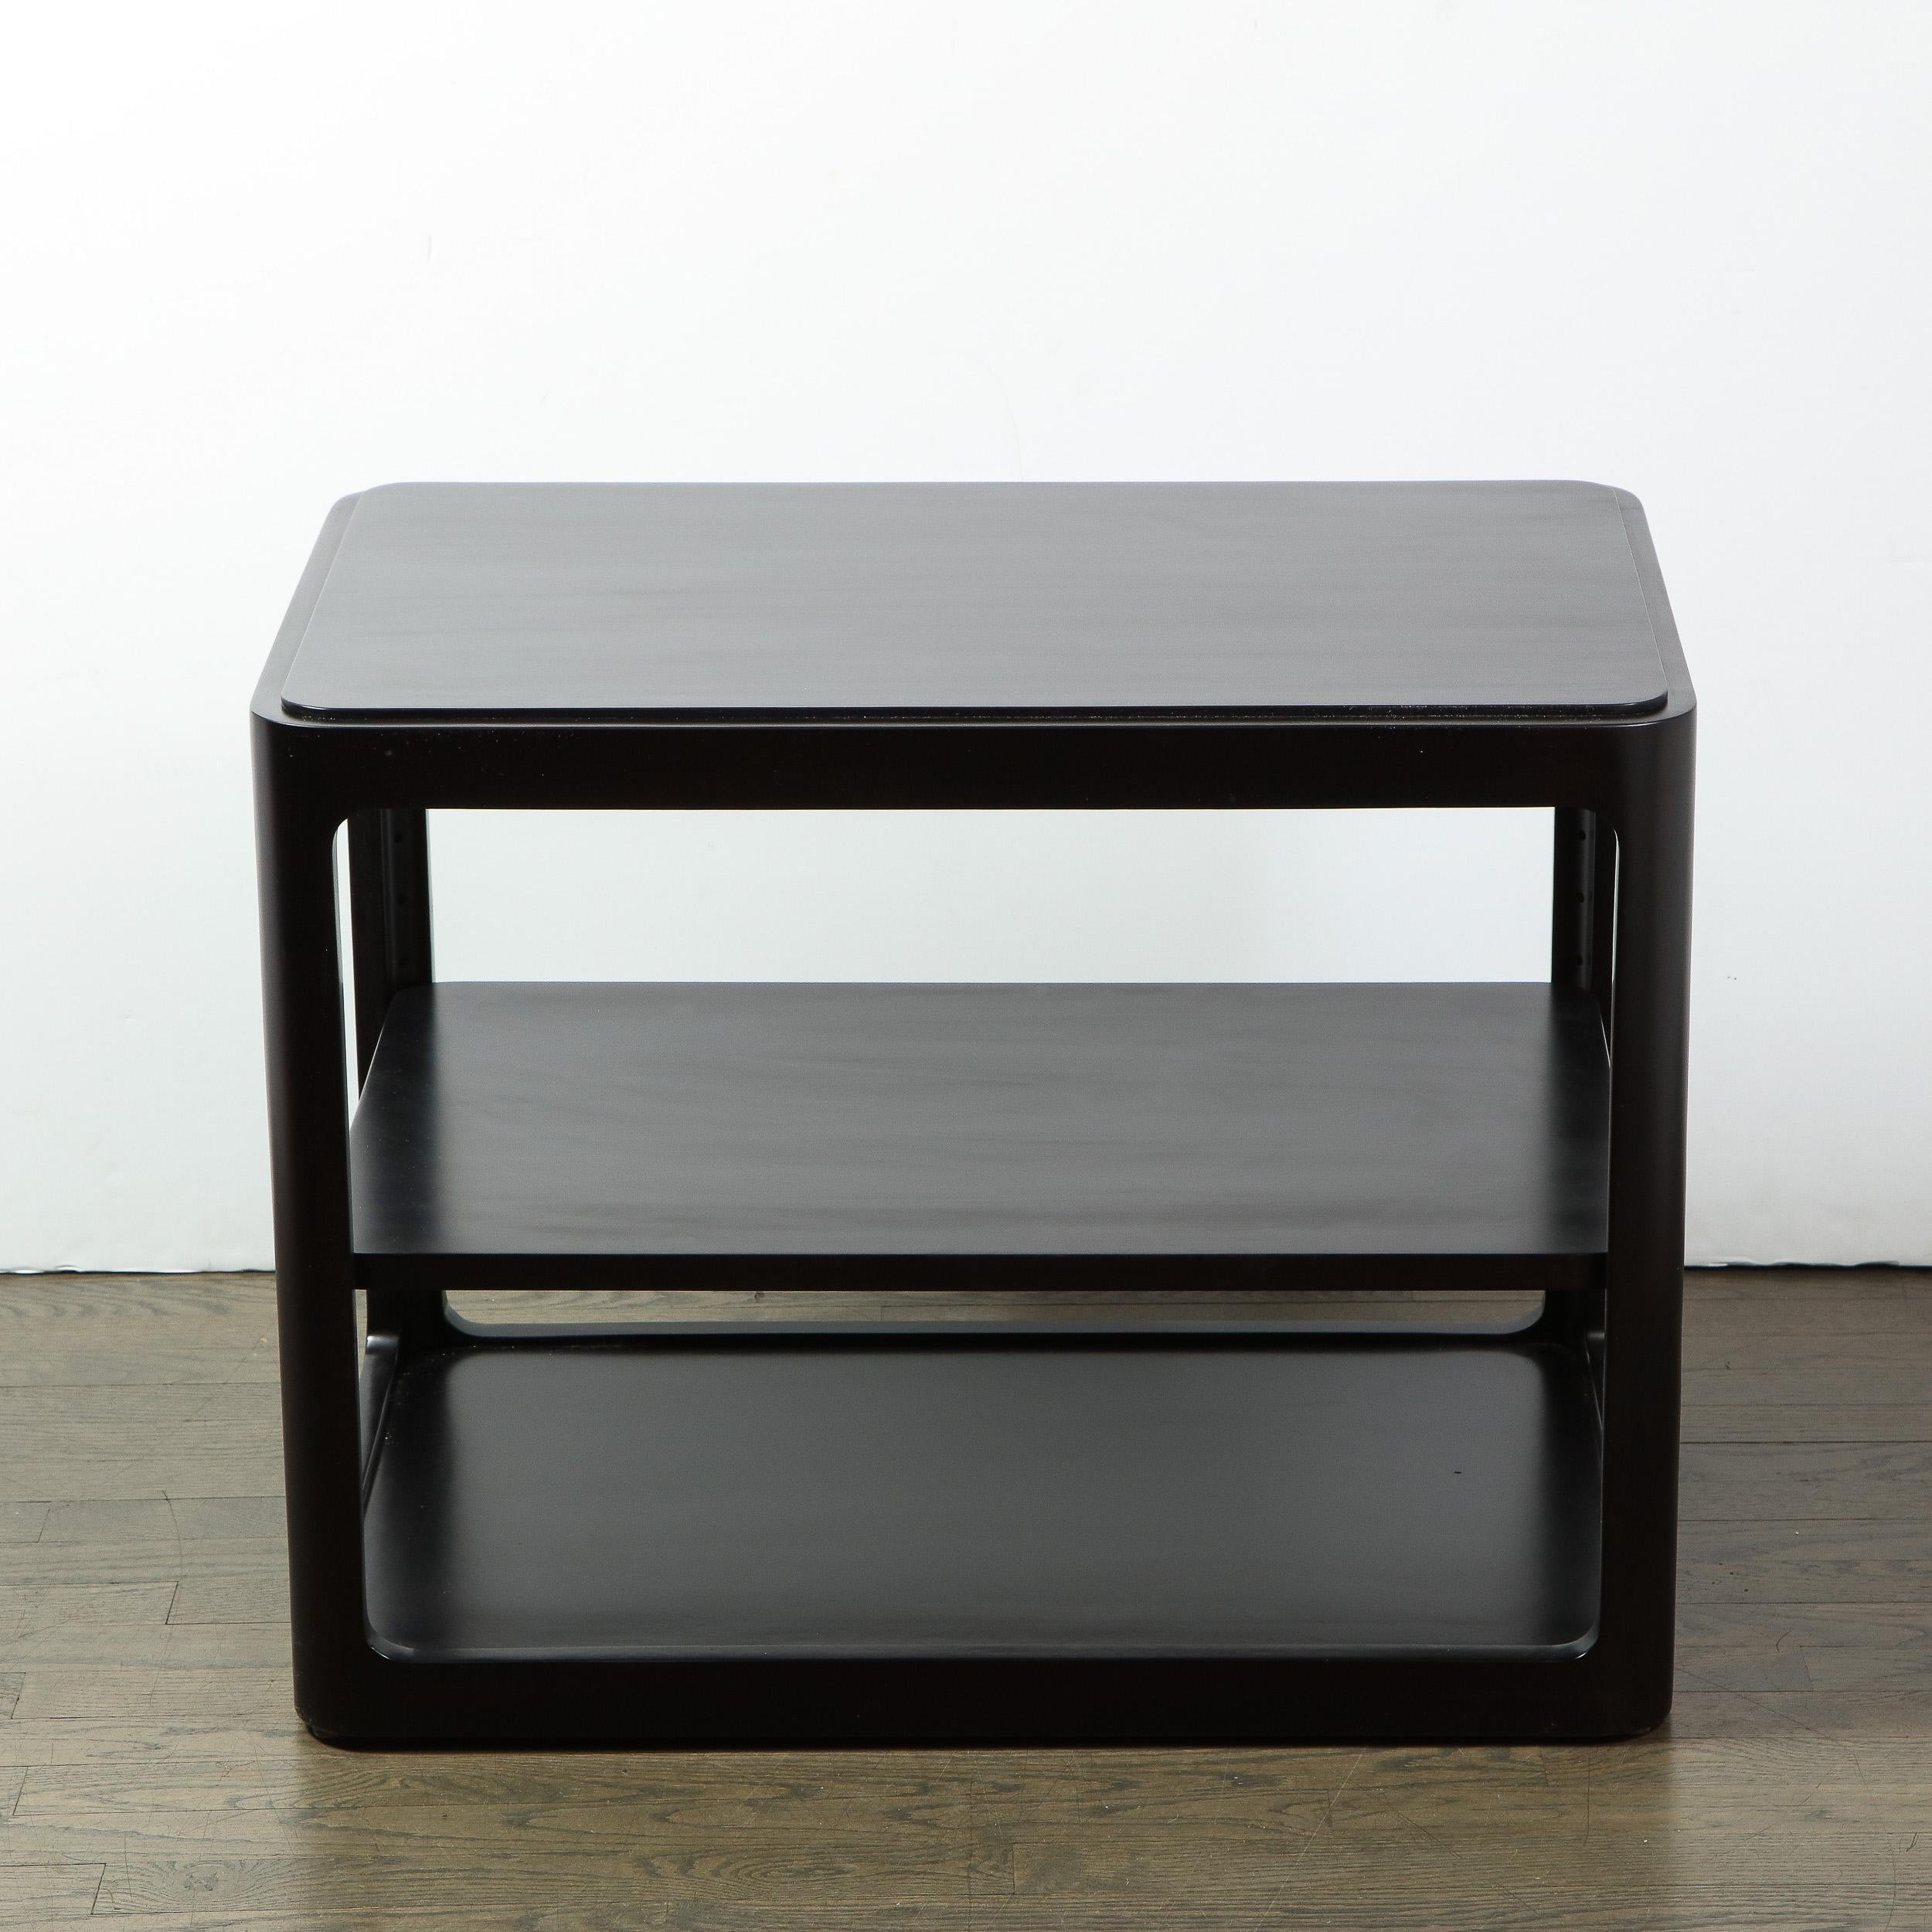 This elegant Mid-Century Modern side/ end table was handcrafted in Berne, Indiana by the fabled American design firm Dunbar, circa 1960. It features a two-tier rectangular form with rounded corners and a subtly inset top- all finished in ebonized